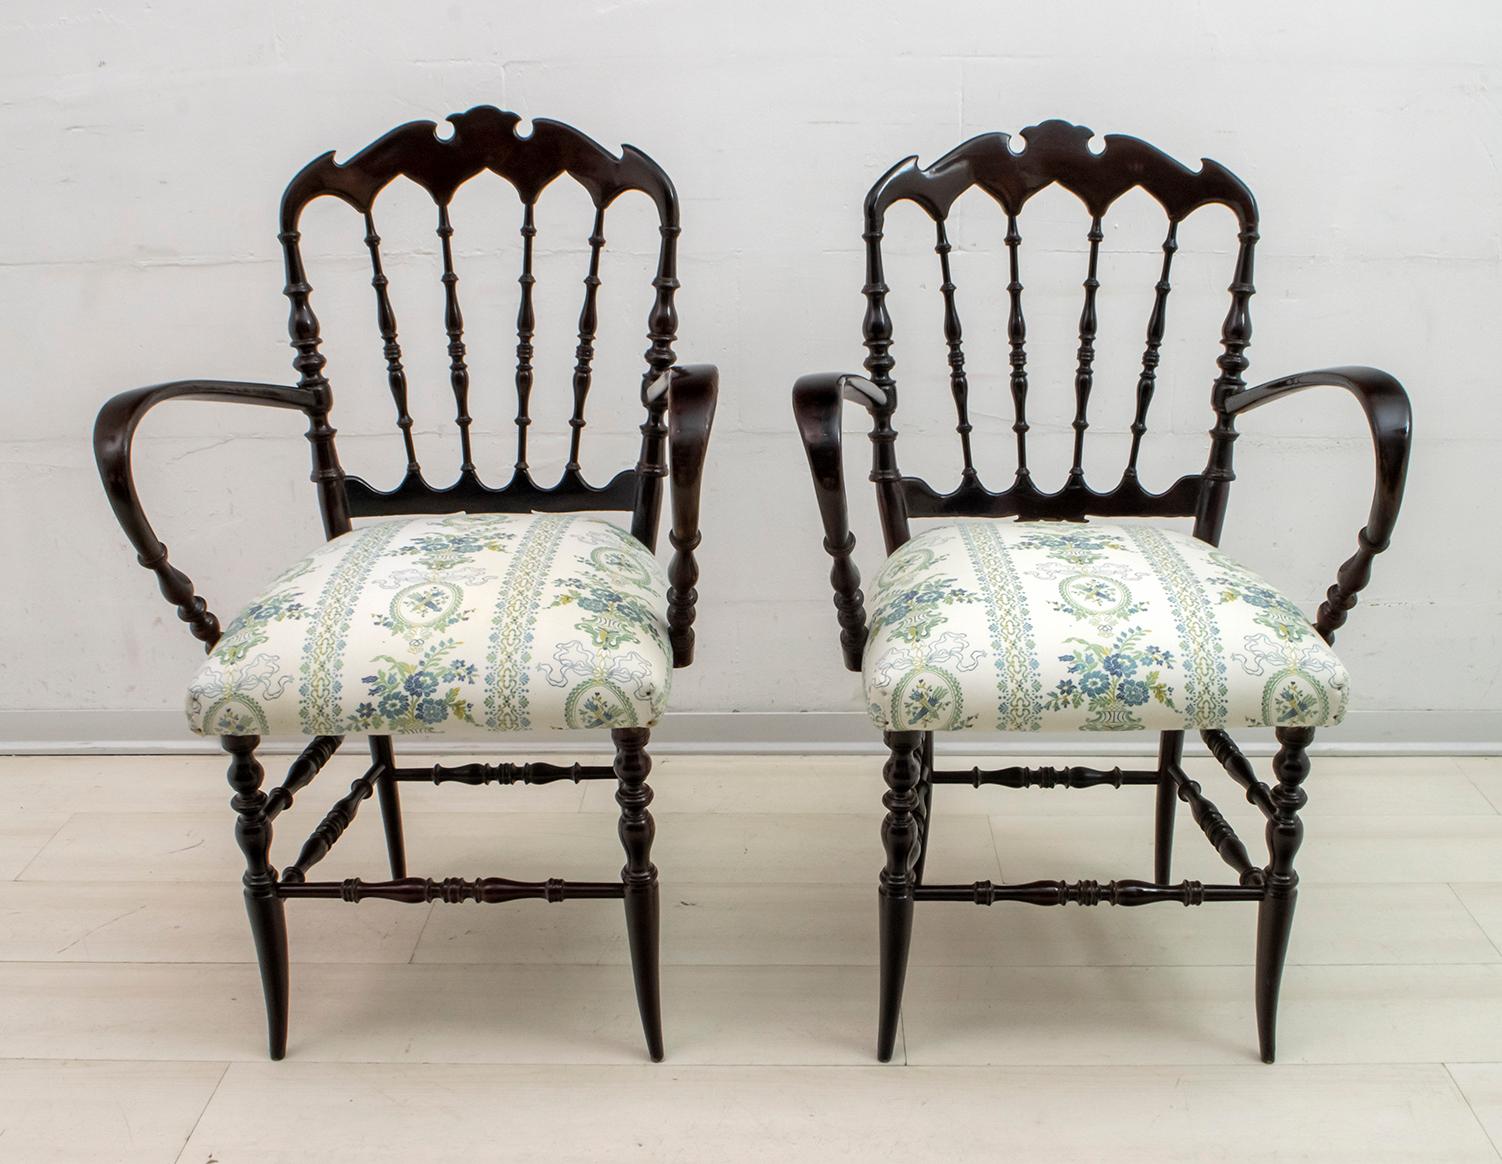 This pair of typical Chiavari chairs with armrests was designed by Gaetano Descalzi in the city of Chiavari in Italy, where they have been produced since then in various models.
Made of mahogany-colored beech and covered in satin